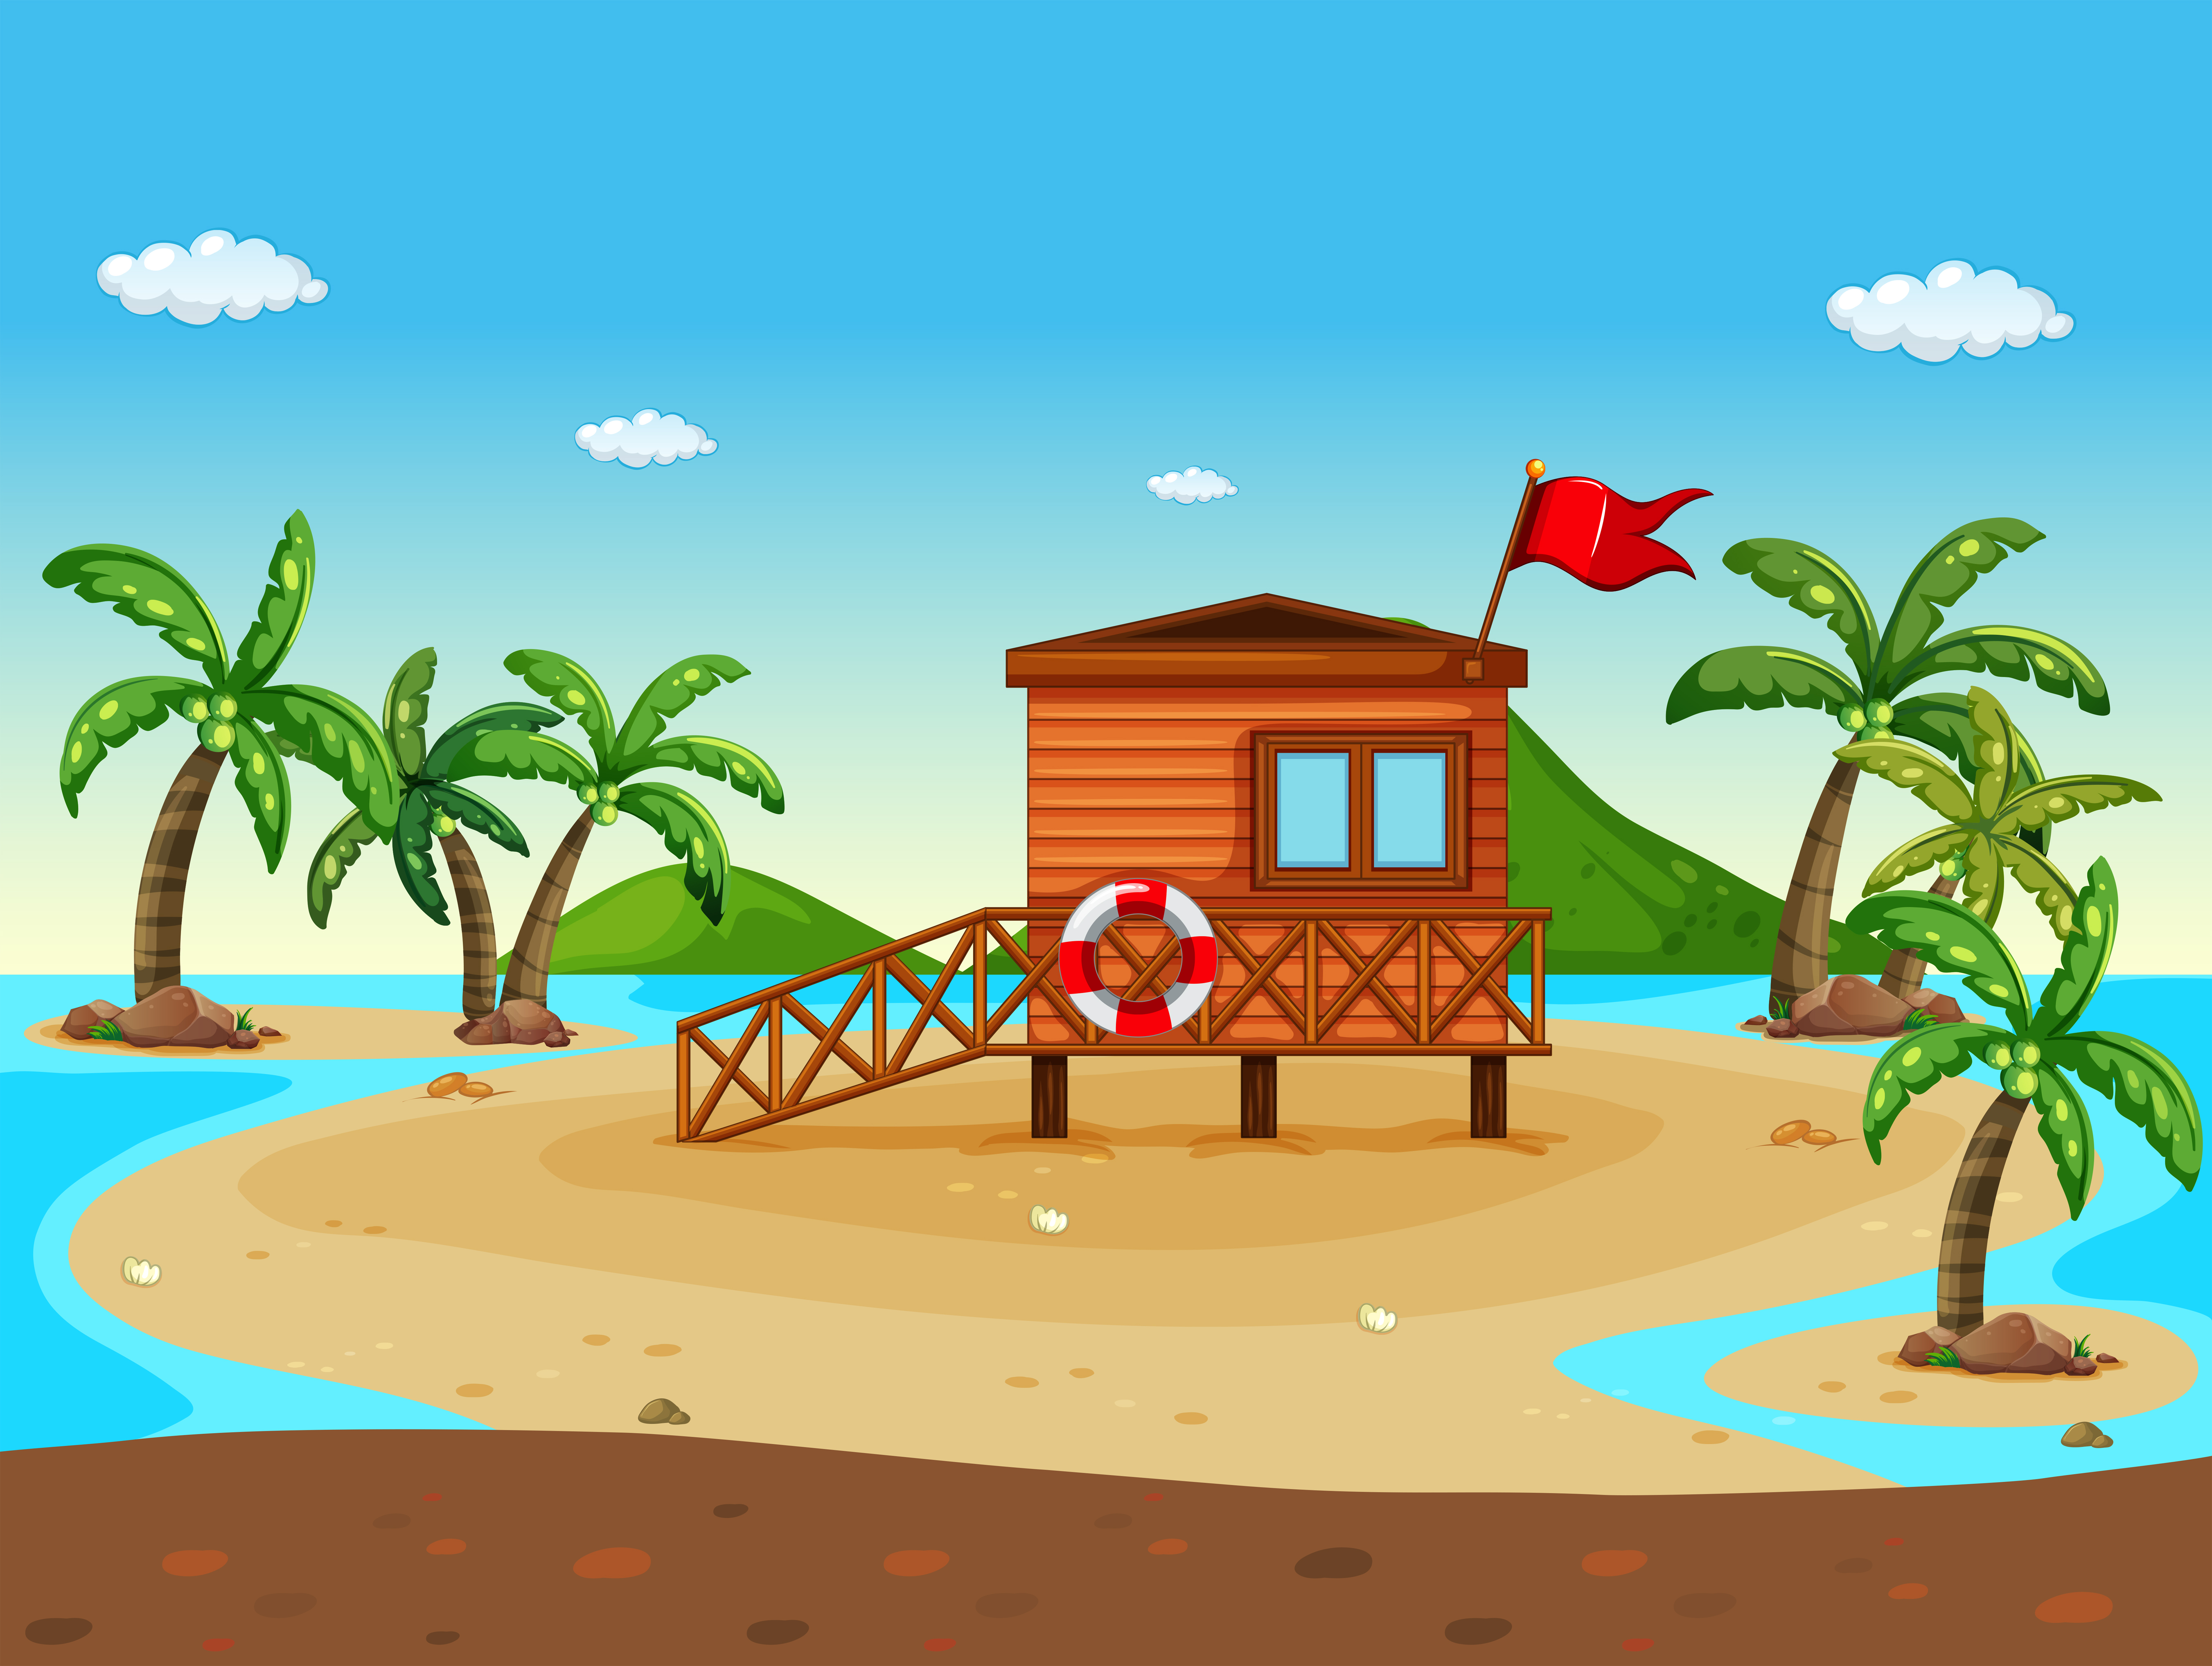 Lifeguard house on the beach - Download Free Vectors ...